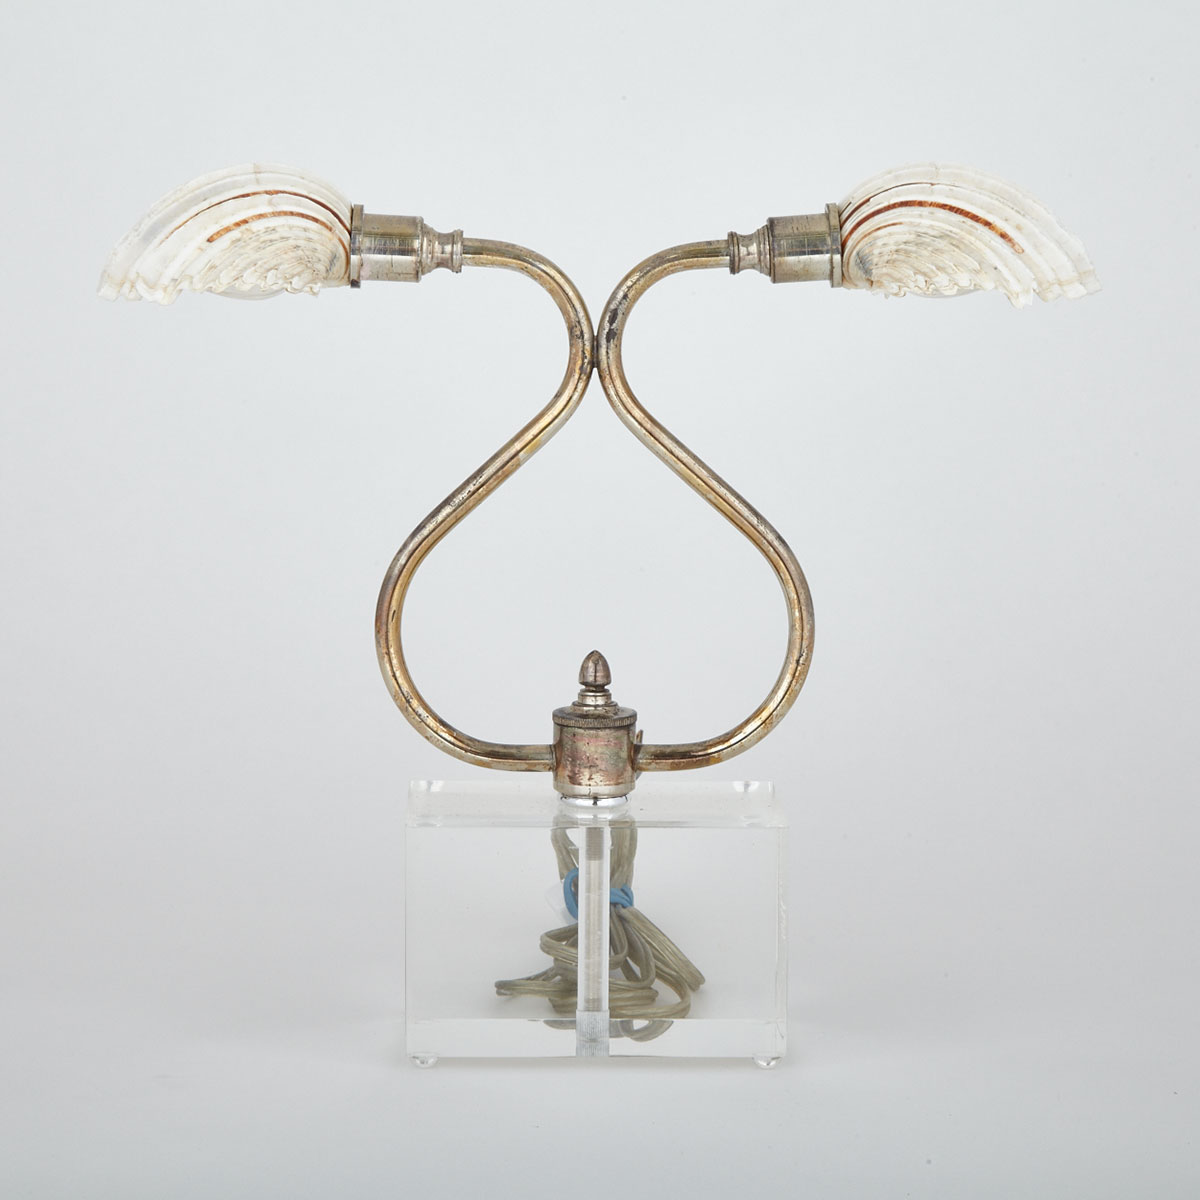 Silver Plate Double Desk Lamp, mid 20th century